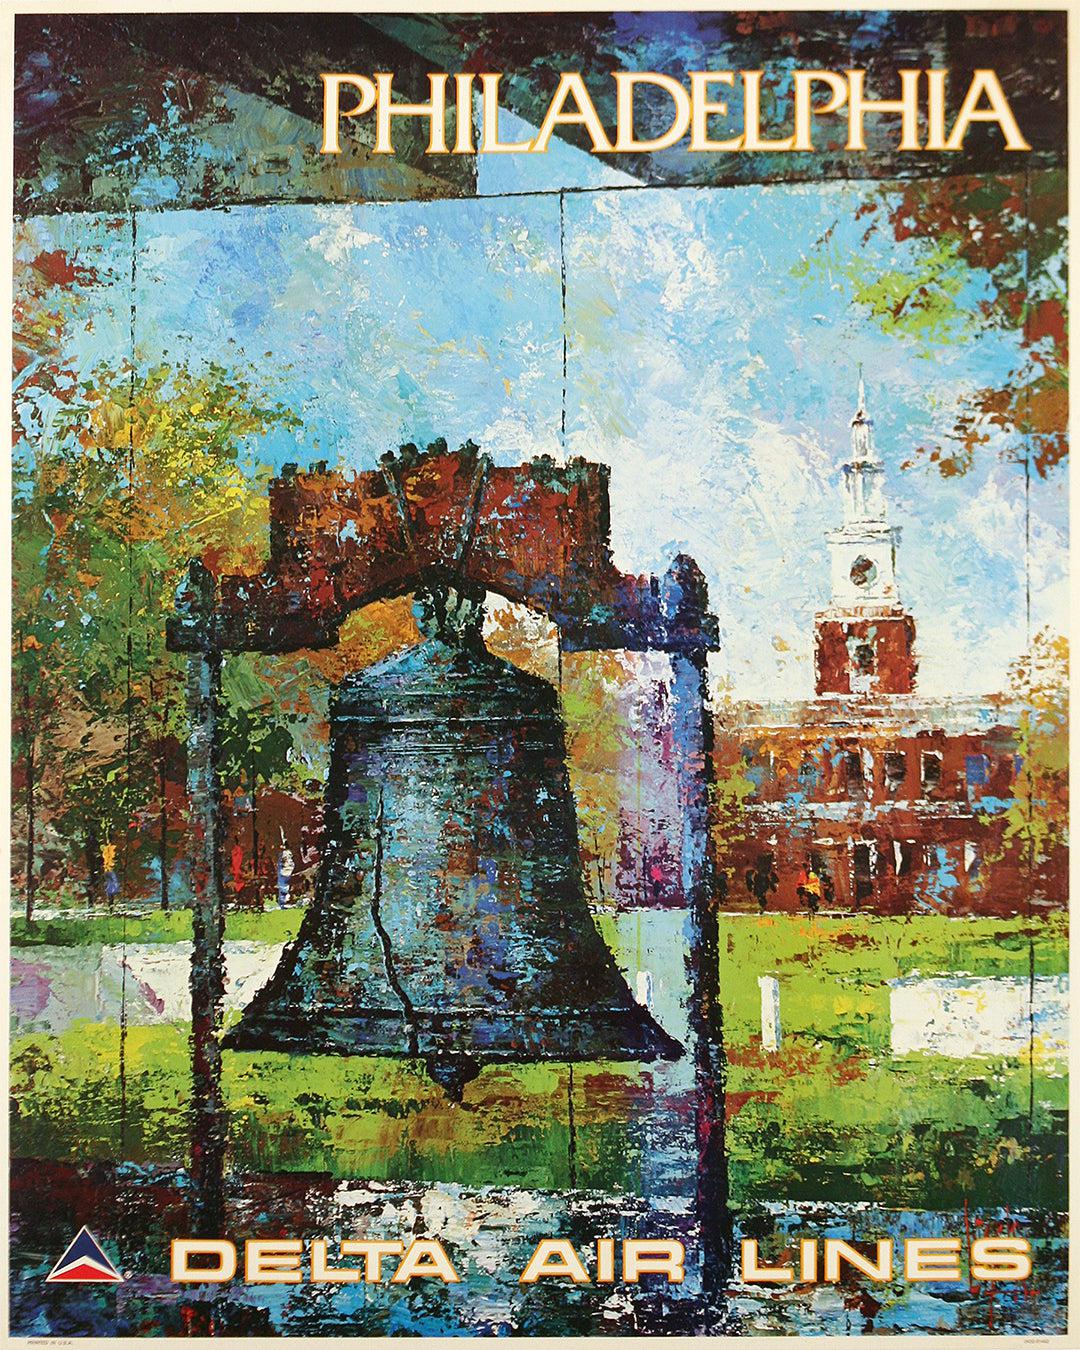 Original 1970's Delta Air Lines Poster for Philadelphia by Jack Laycox